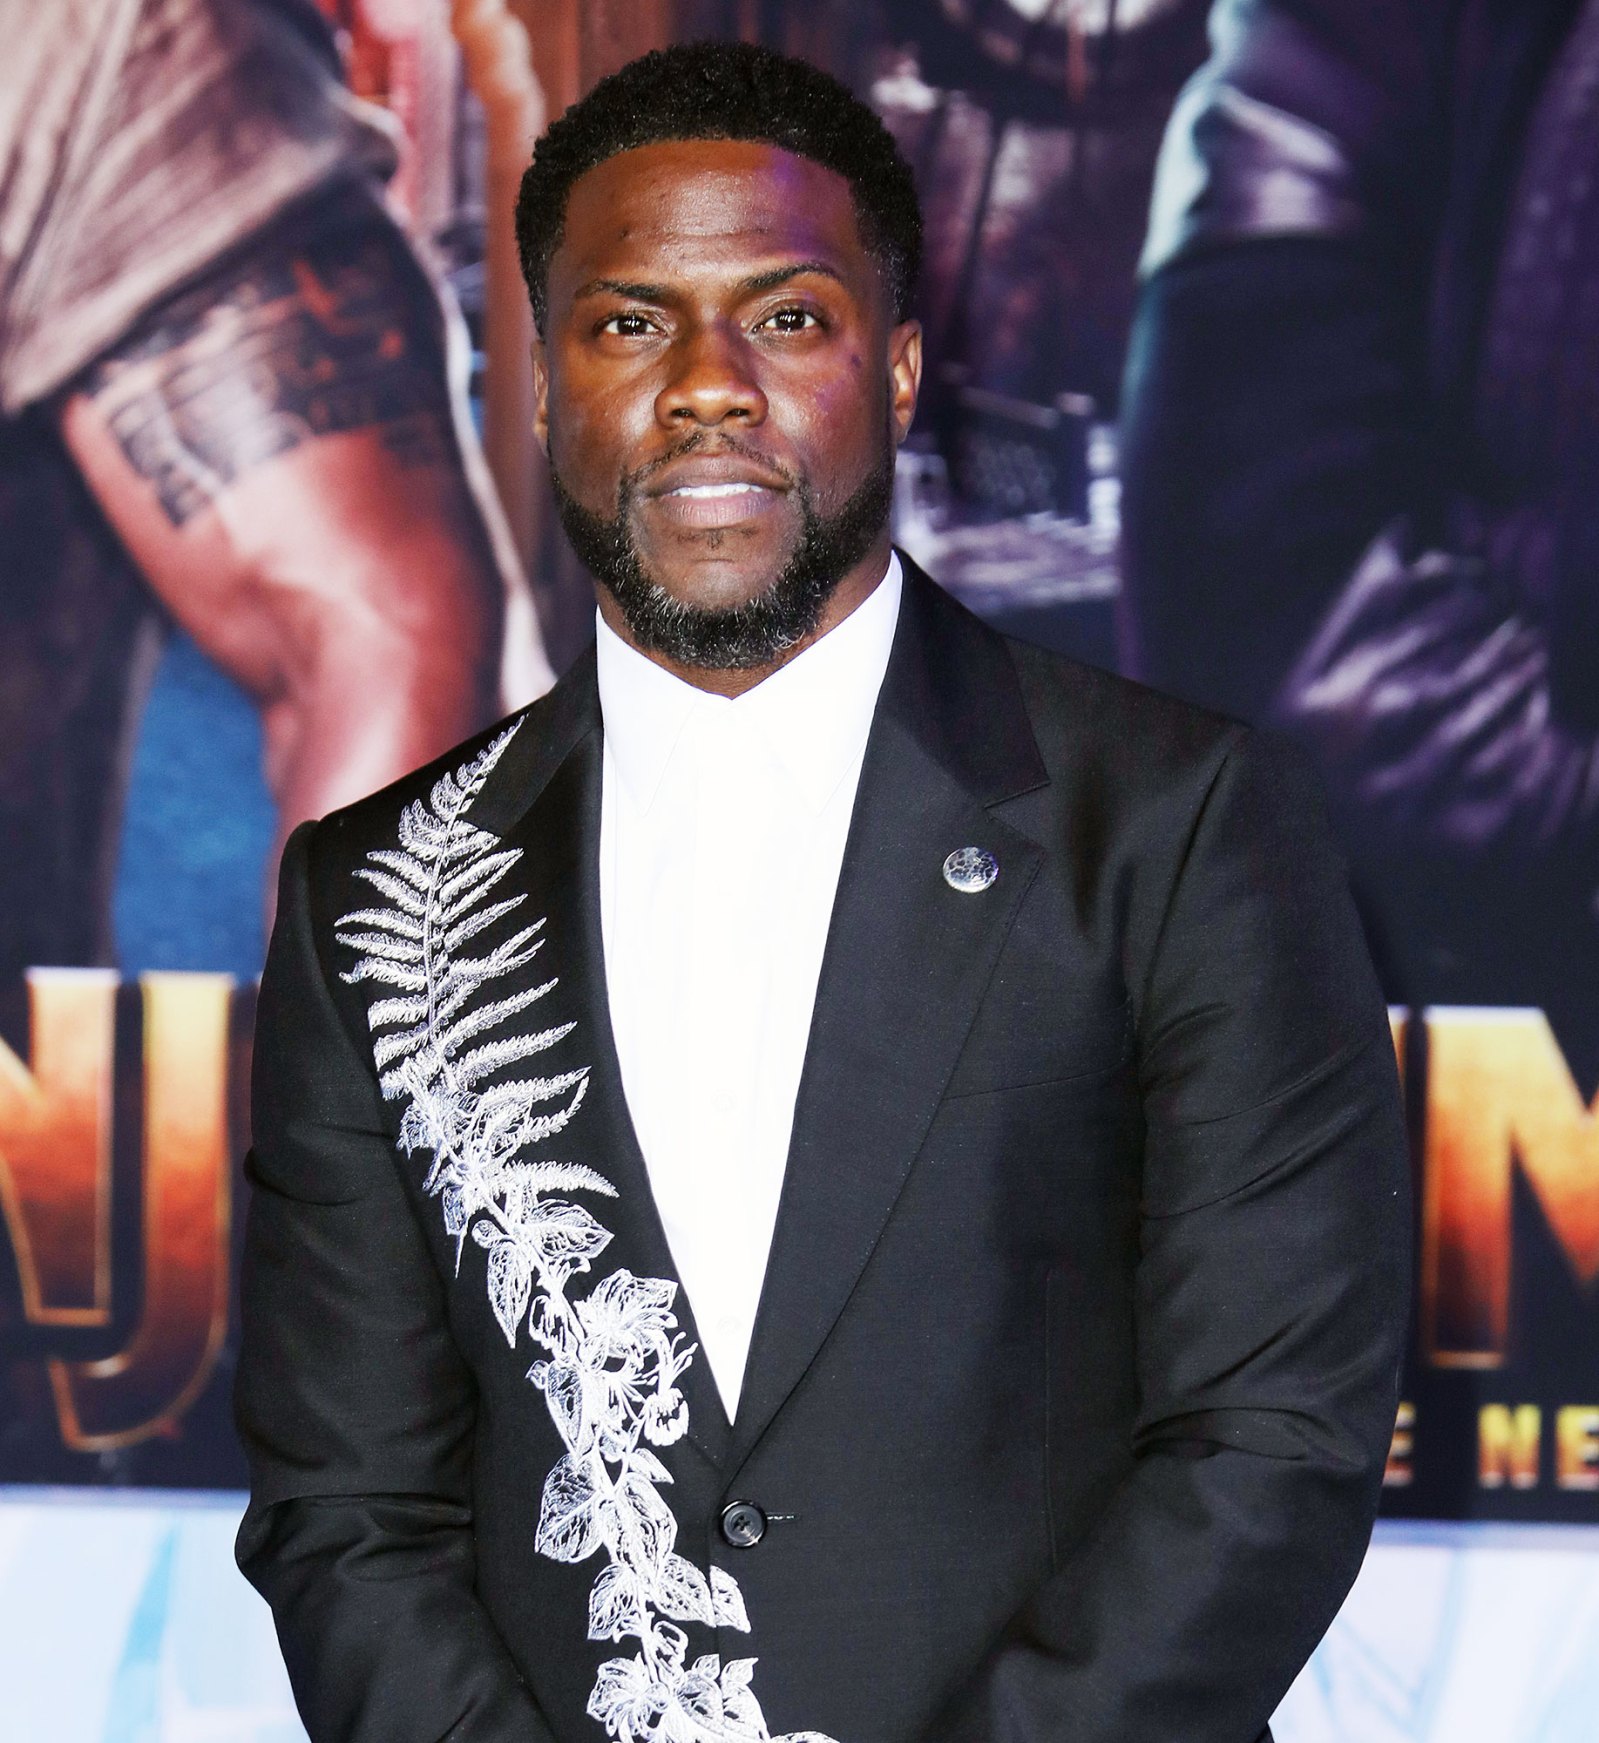 Kevin Hart Reveals He Tested Positive for Coronavirus Around the Same Time as Tom Hanks